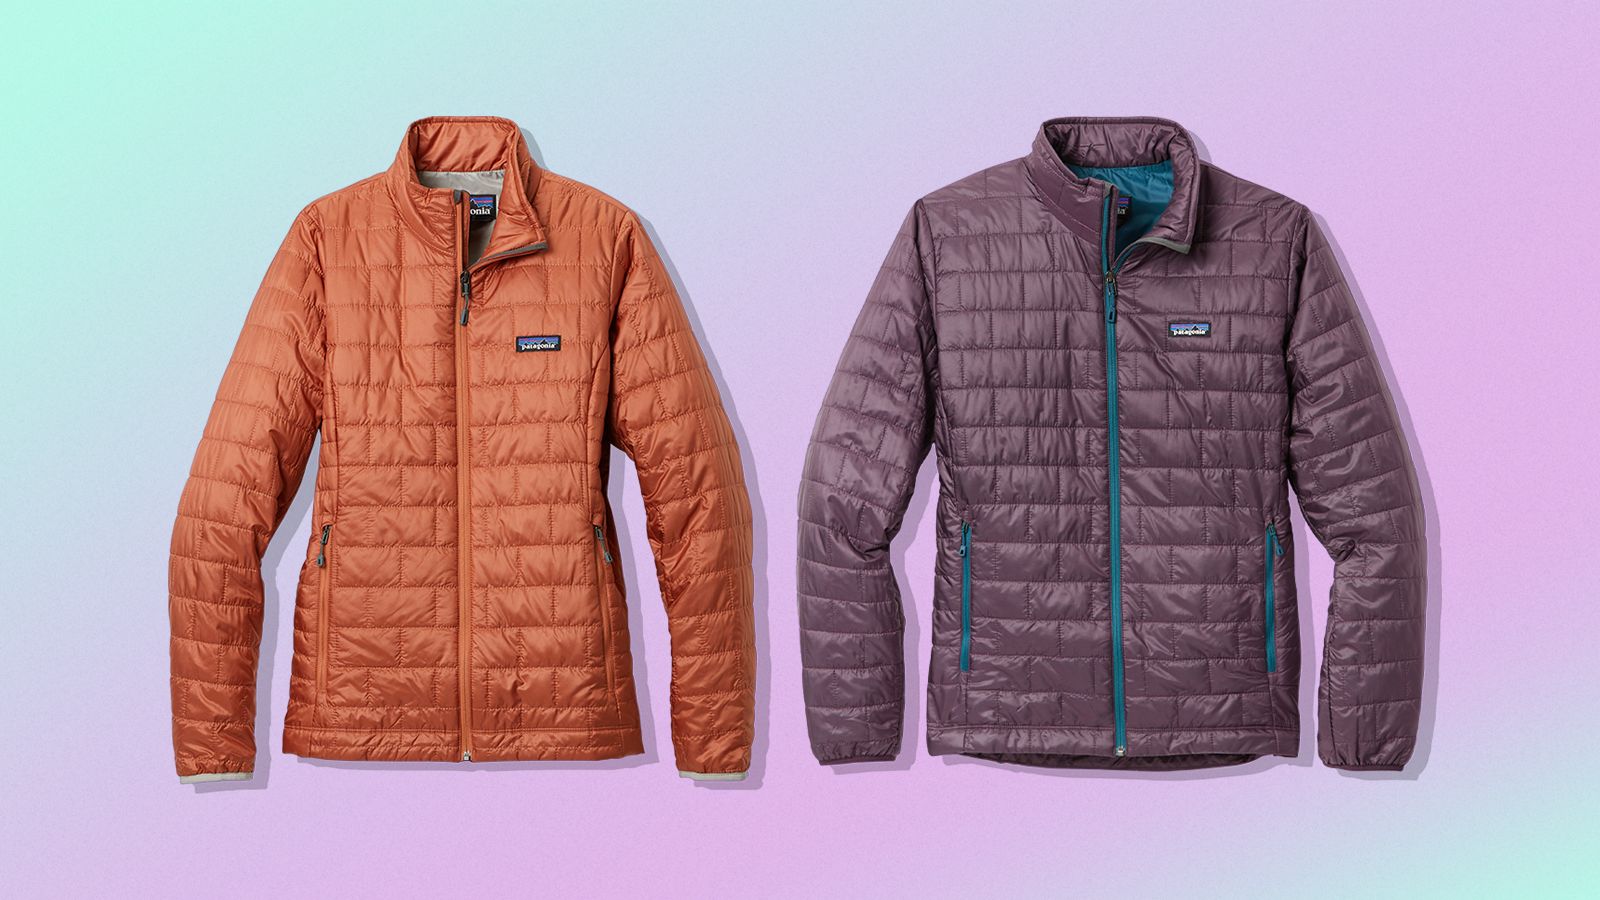 Patagonia: A Brand That Says 'Don't Buy Our Jacket